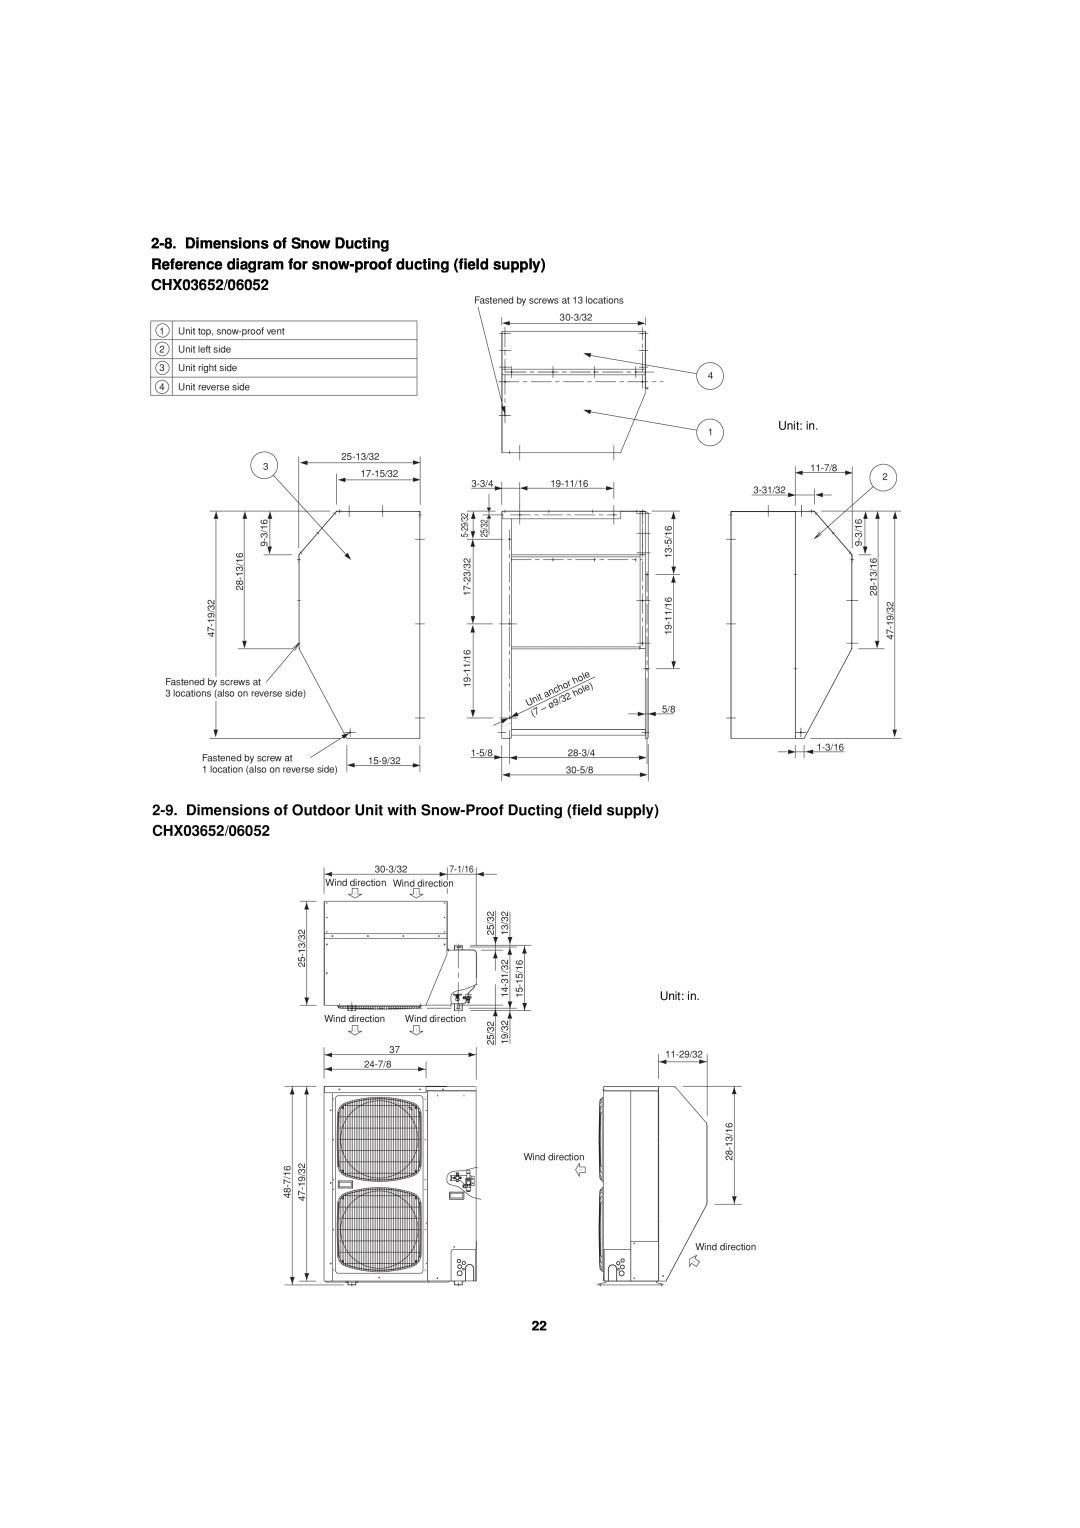 Sanyo 85464359981002 installation instructions Dimensions of Snow Ducting, Unit: in 